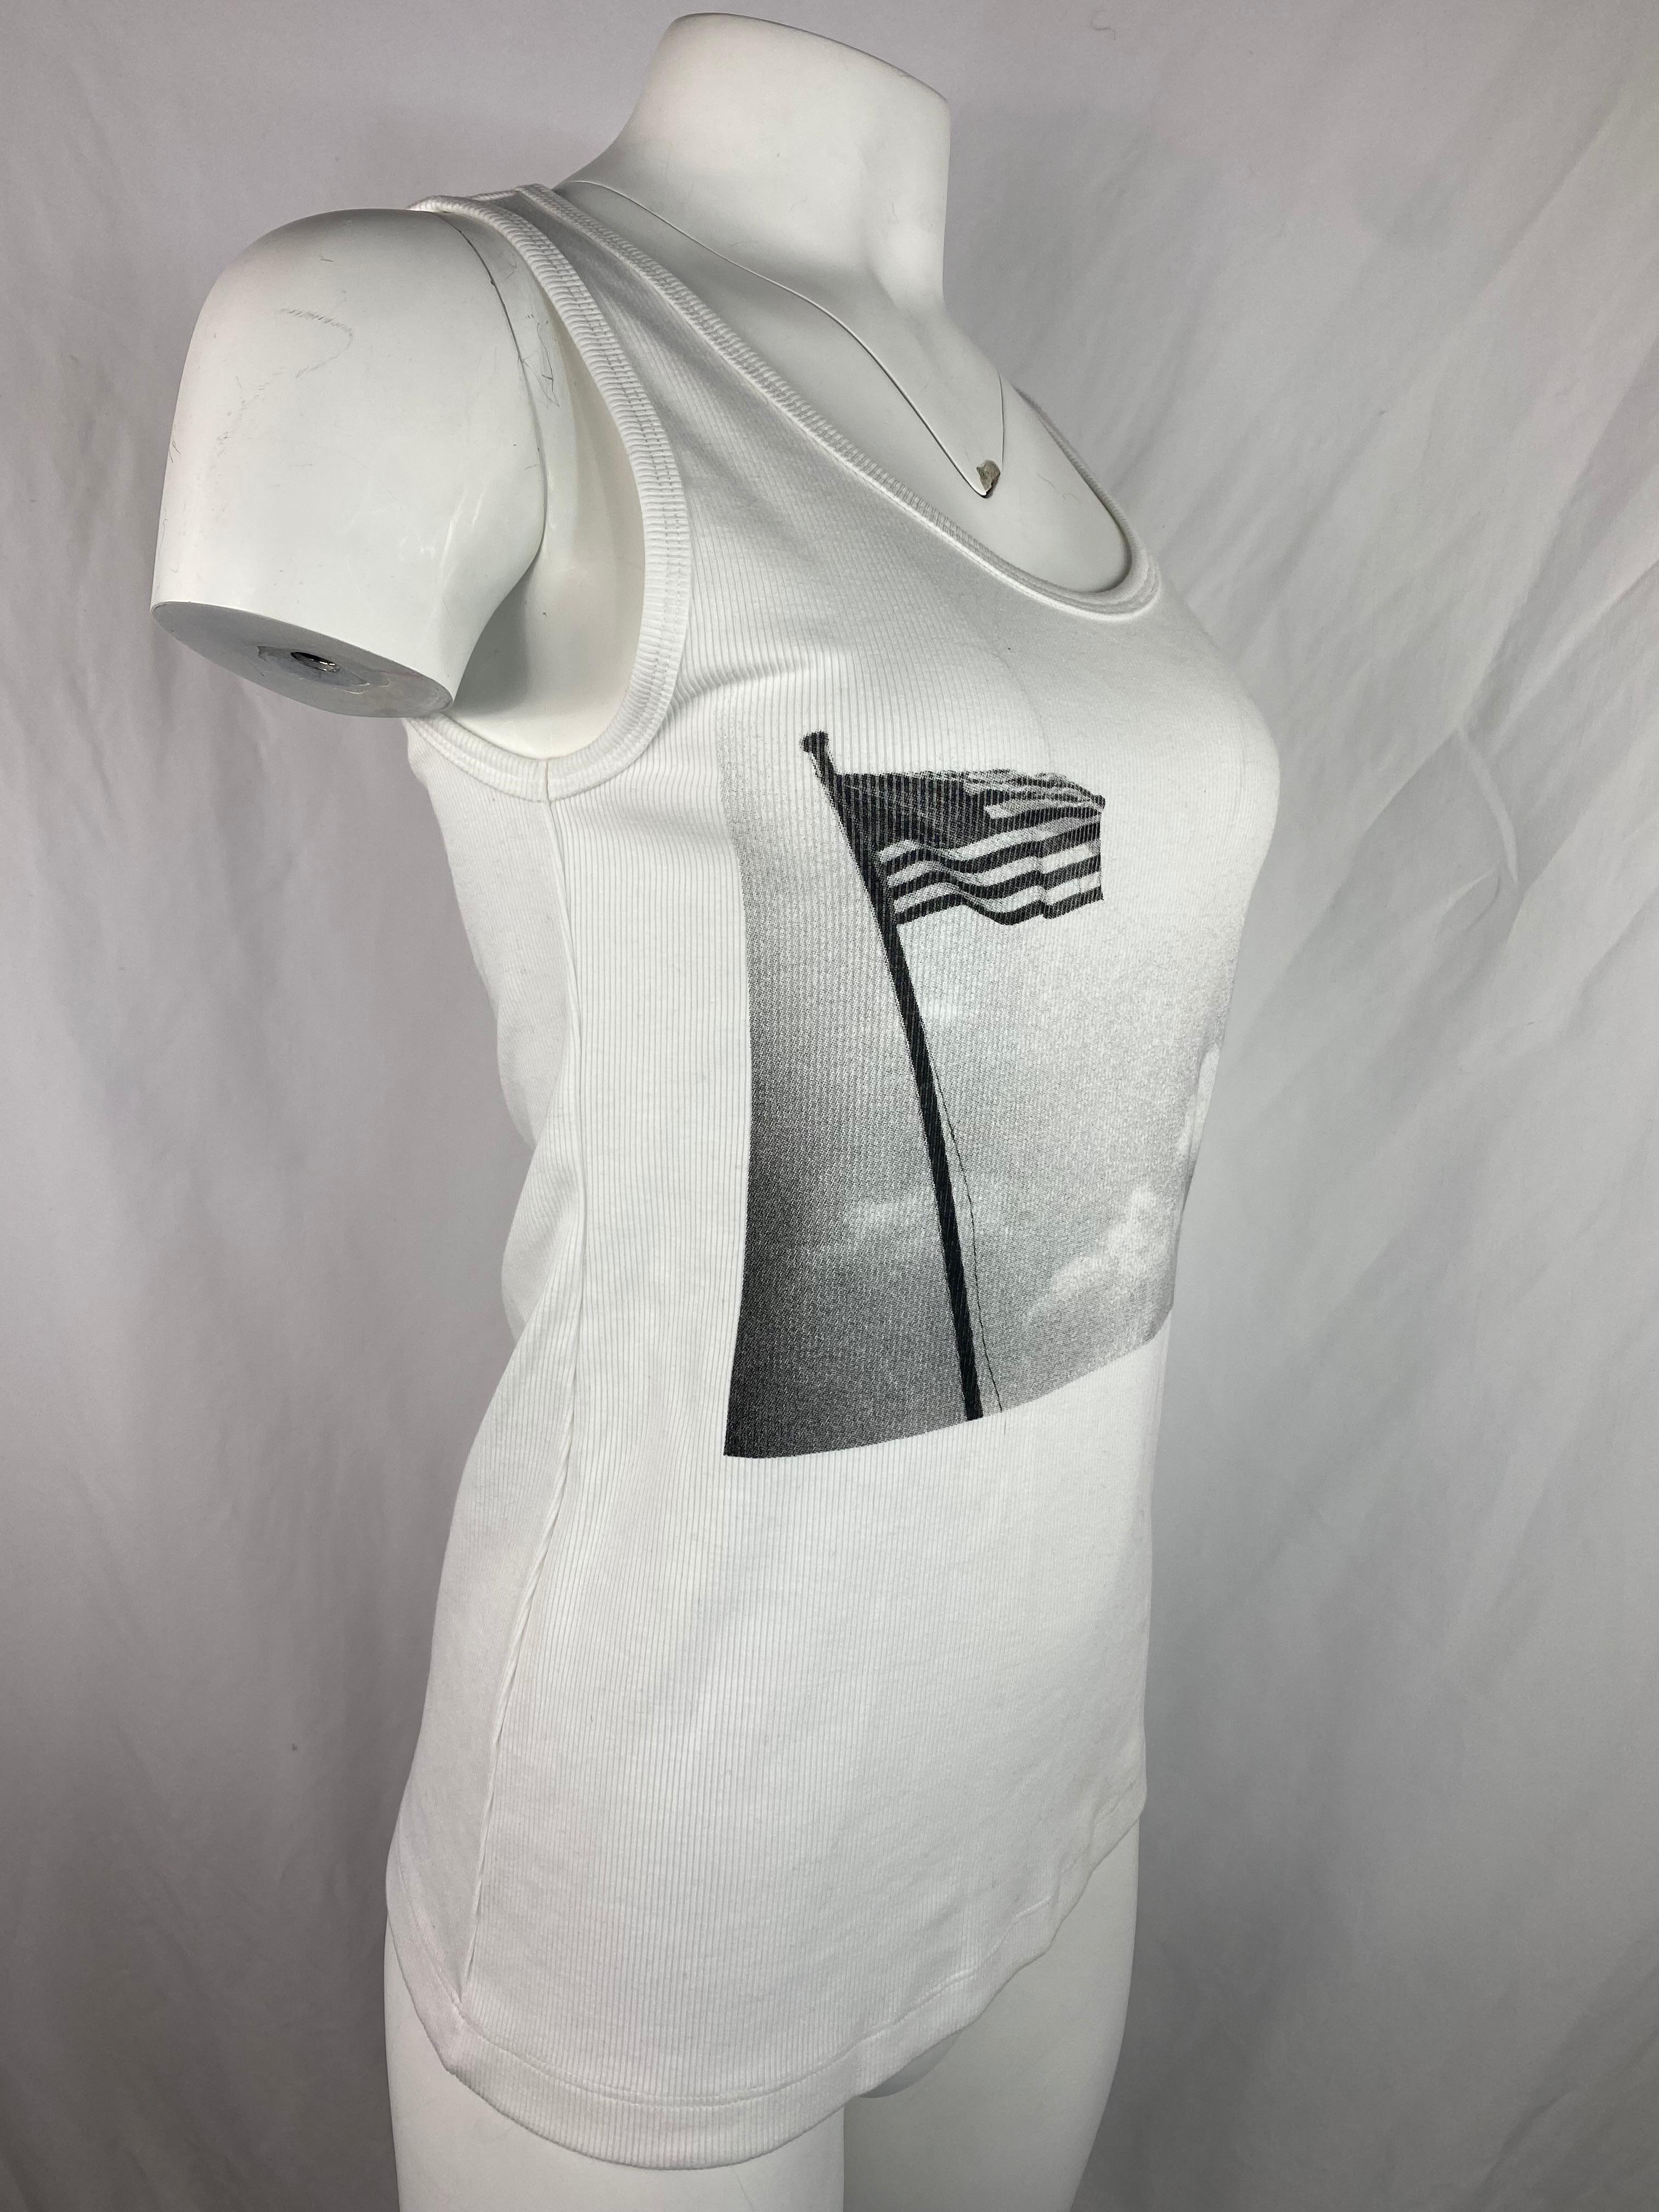 Product details:

The top features black and white American Flag, 1983 print on the front.